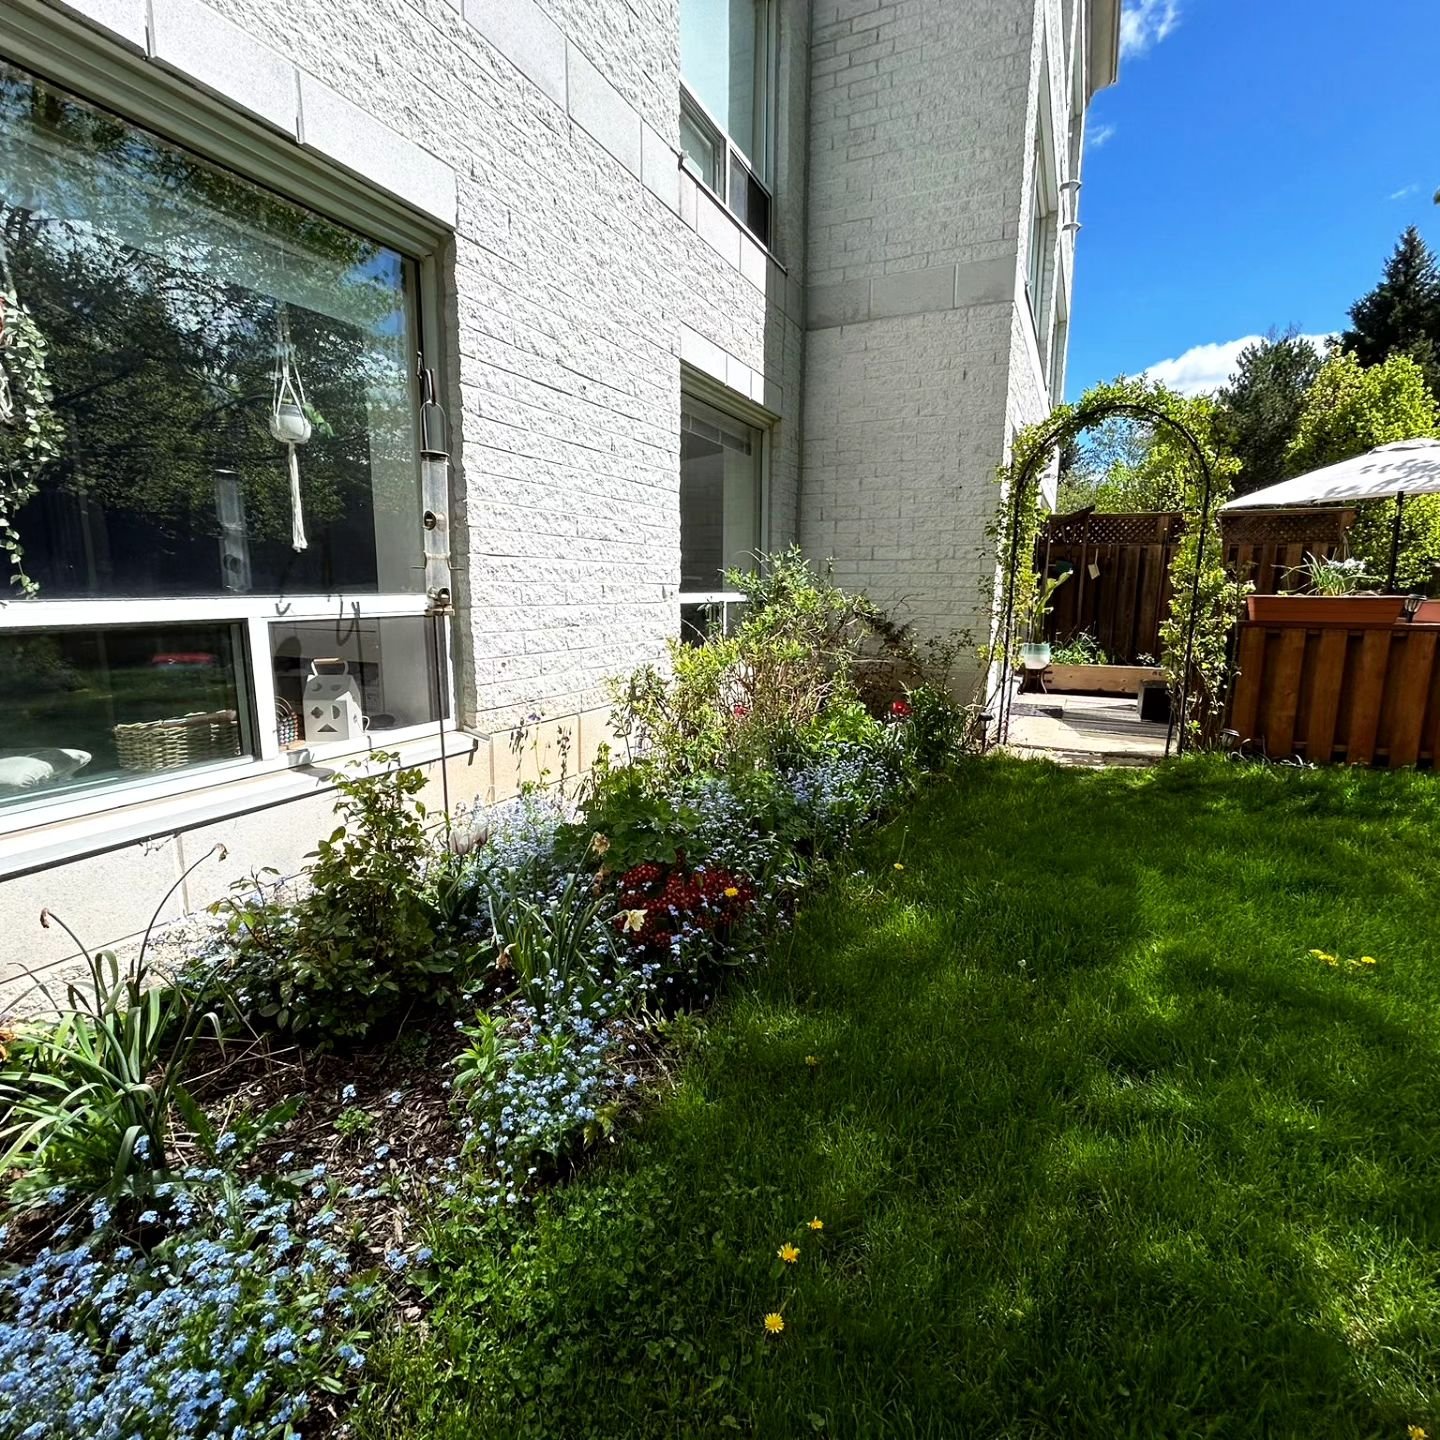 🌞 Open House 🌞
. 
This Saturday from 2pm - 4pm! ⏰️
.
405 Erb St S Waterloo #unit207🏢
. 
Come on out and enjoy this bright &amp; spacious condo with a back patio! 
.
This will be happening only on Saturday as Sunday will be celebrating mothers! 🍾 